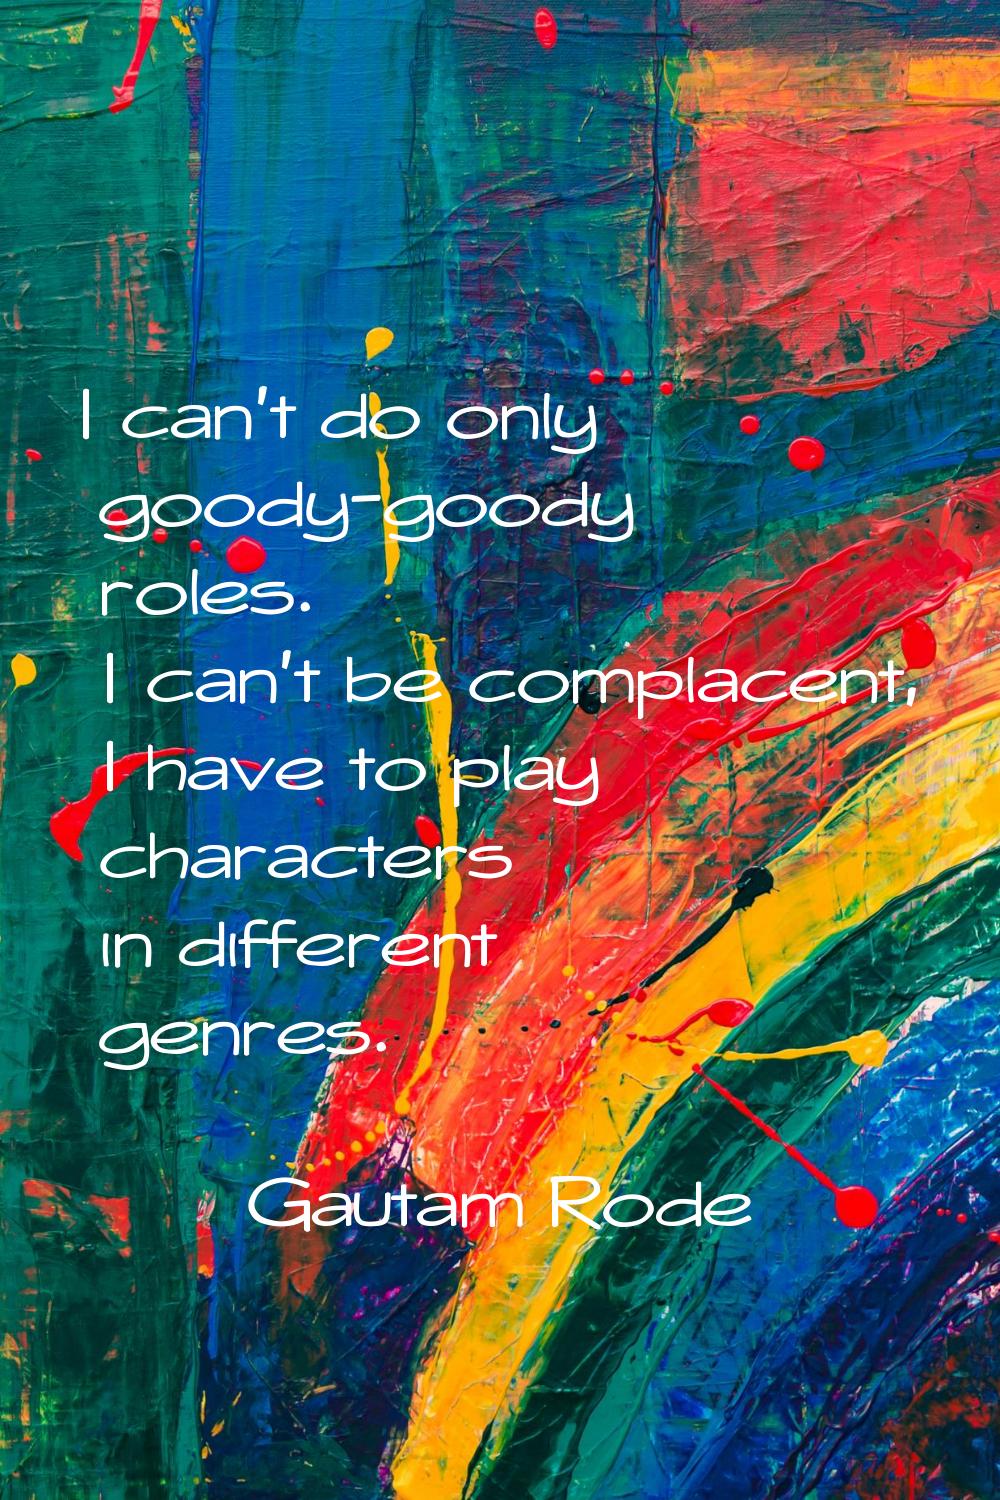 I can't do only goody-goody roles. I can't be complacent, I have to play characters in different ge